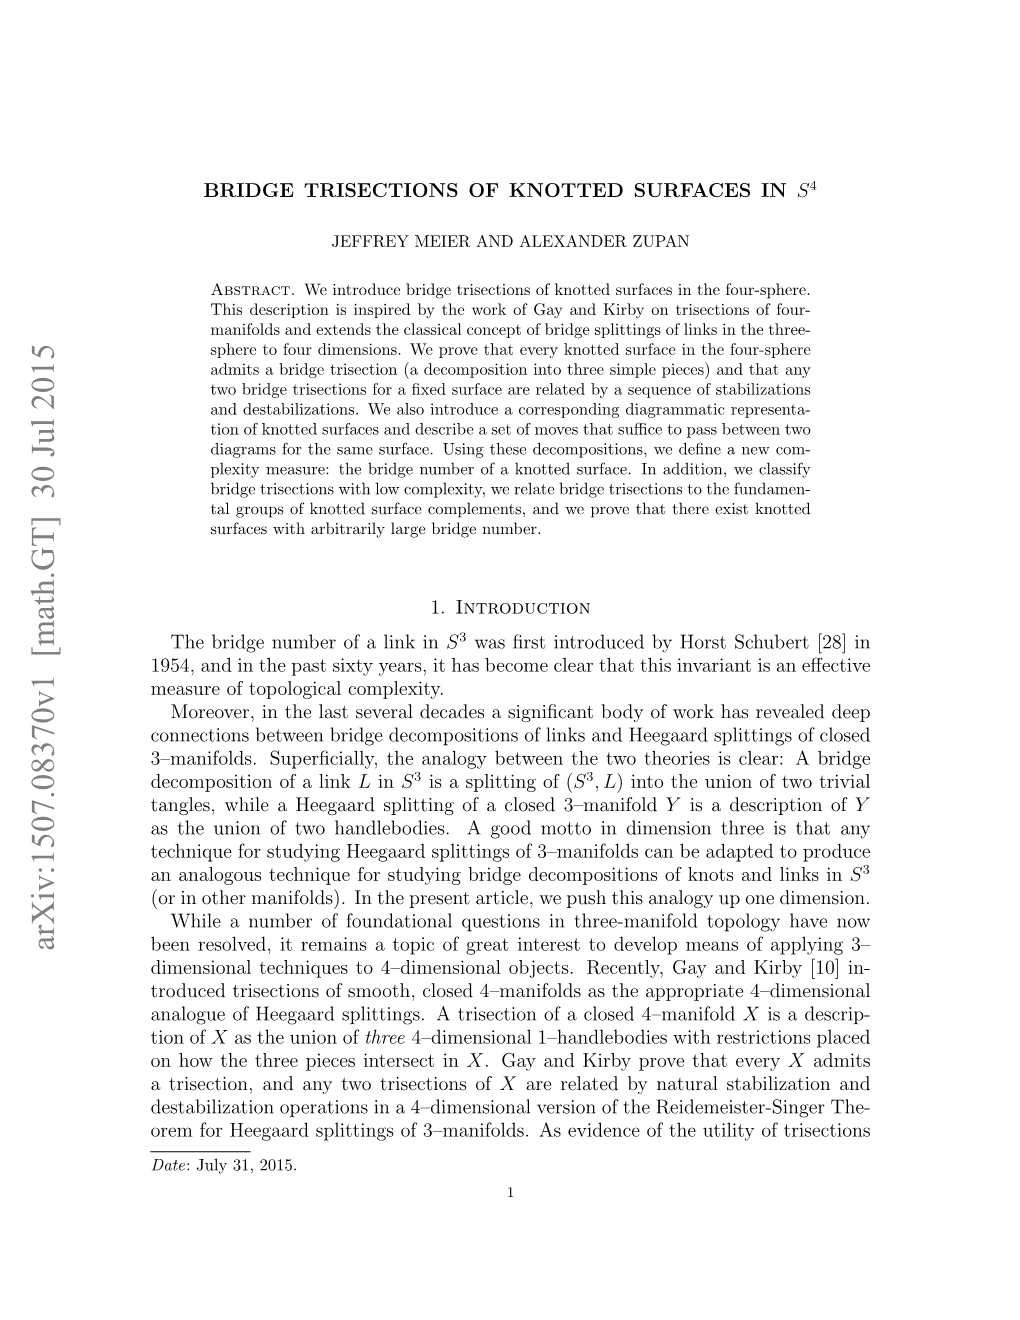 Bridge Trisections of Knotted Surfaces in $ S^ 4$